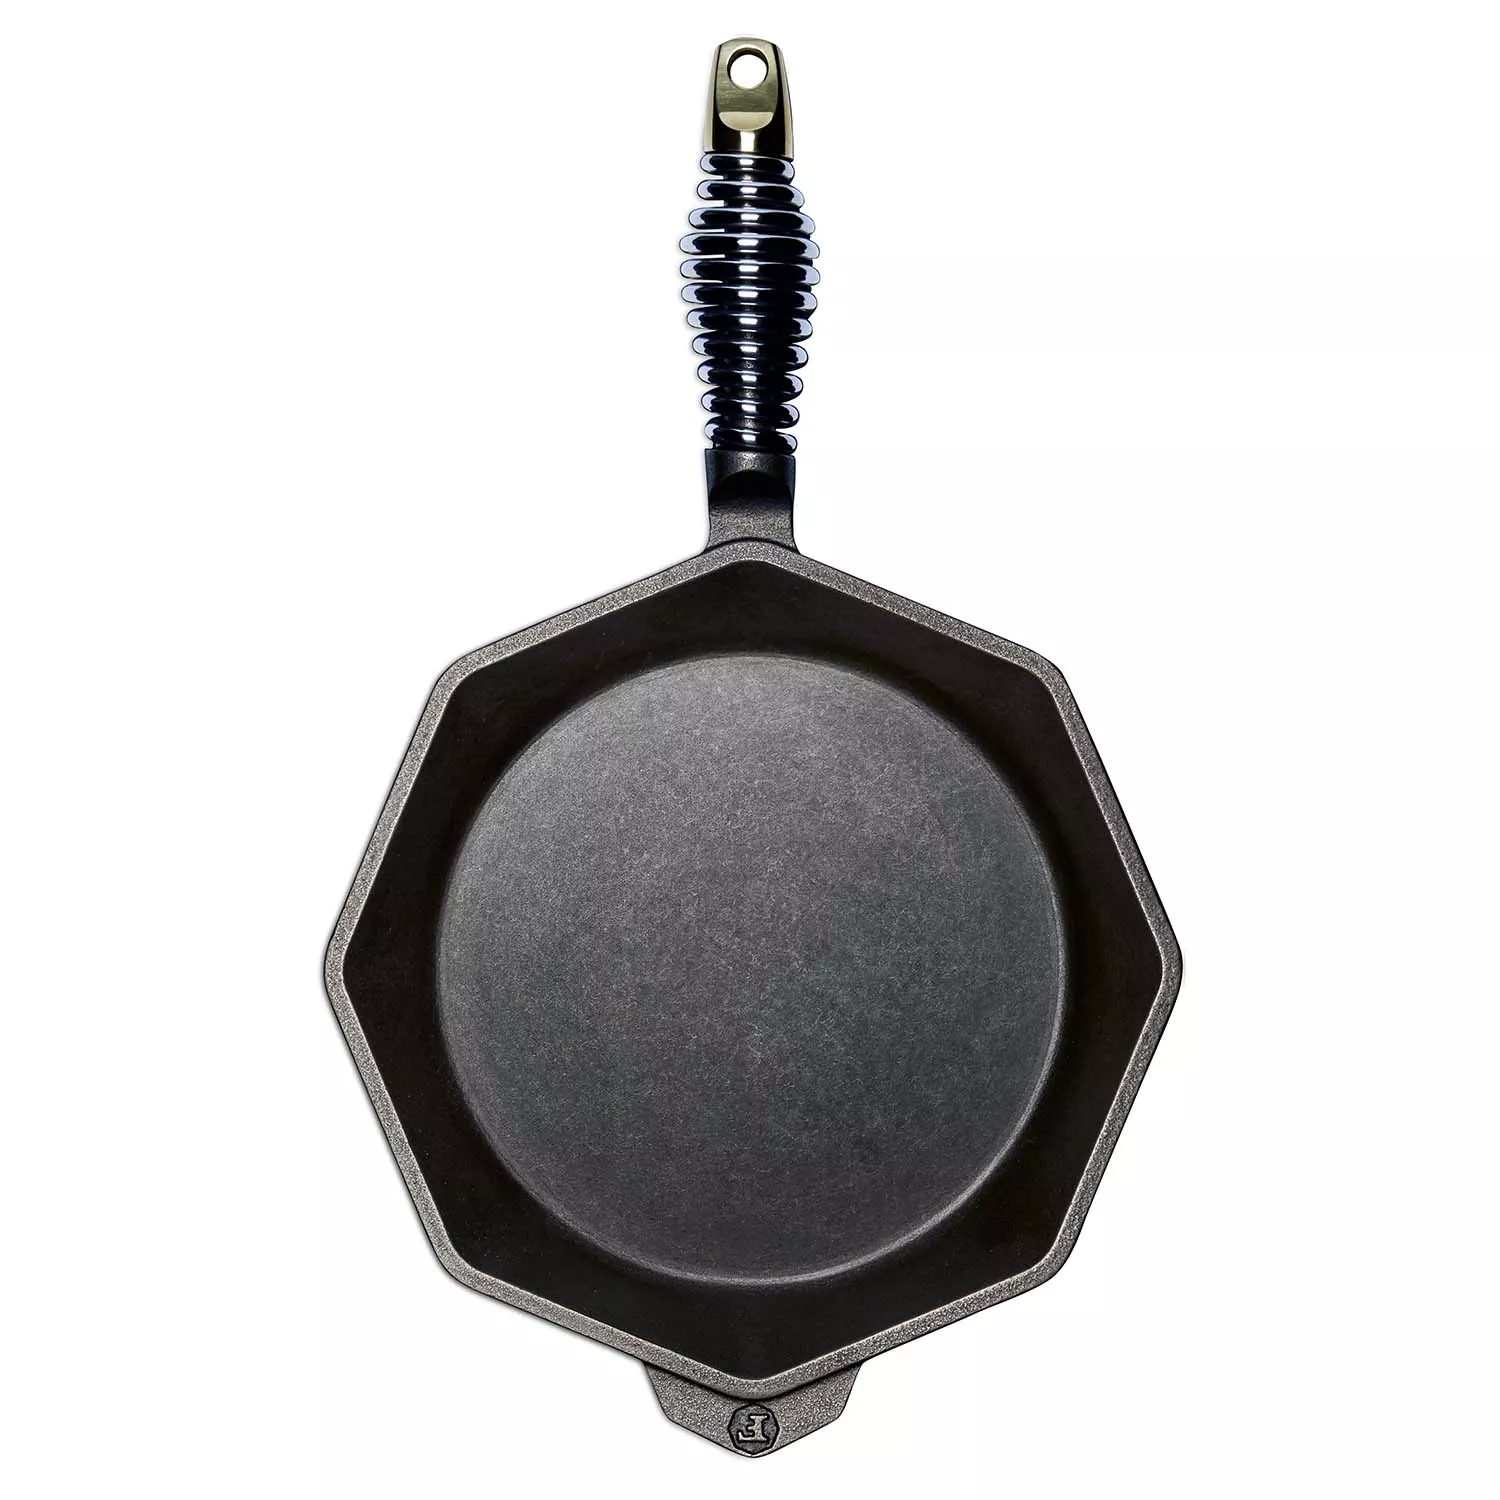 ooni Cast Iron Skillet - Cast Iron Pan - Cast Iron Skillet with Removable  Handle - Cast Iron Frying Pan - Pre-Seasoned Oven Safe